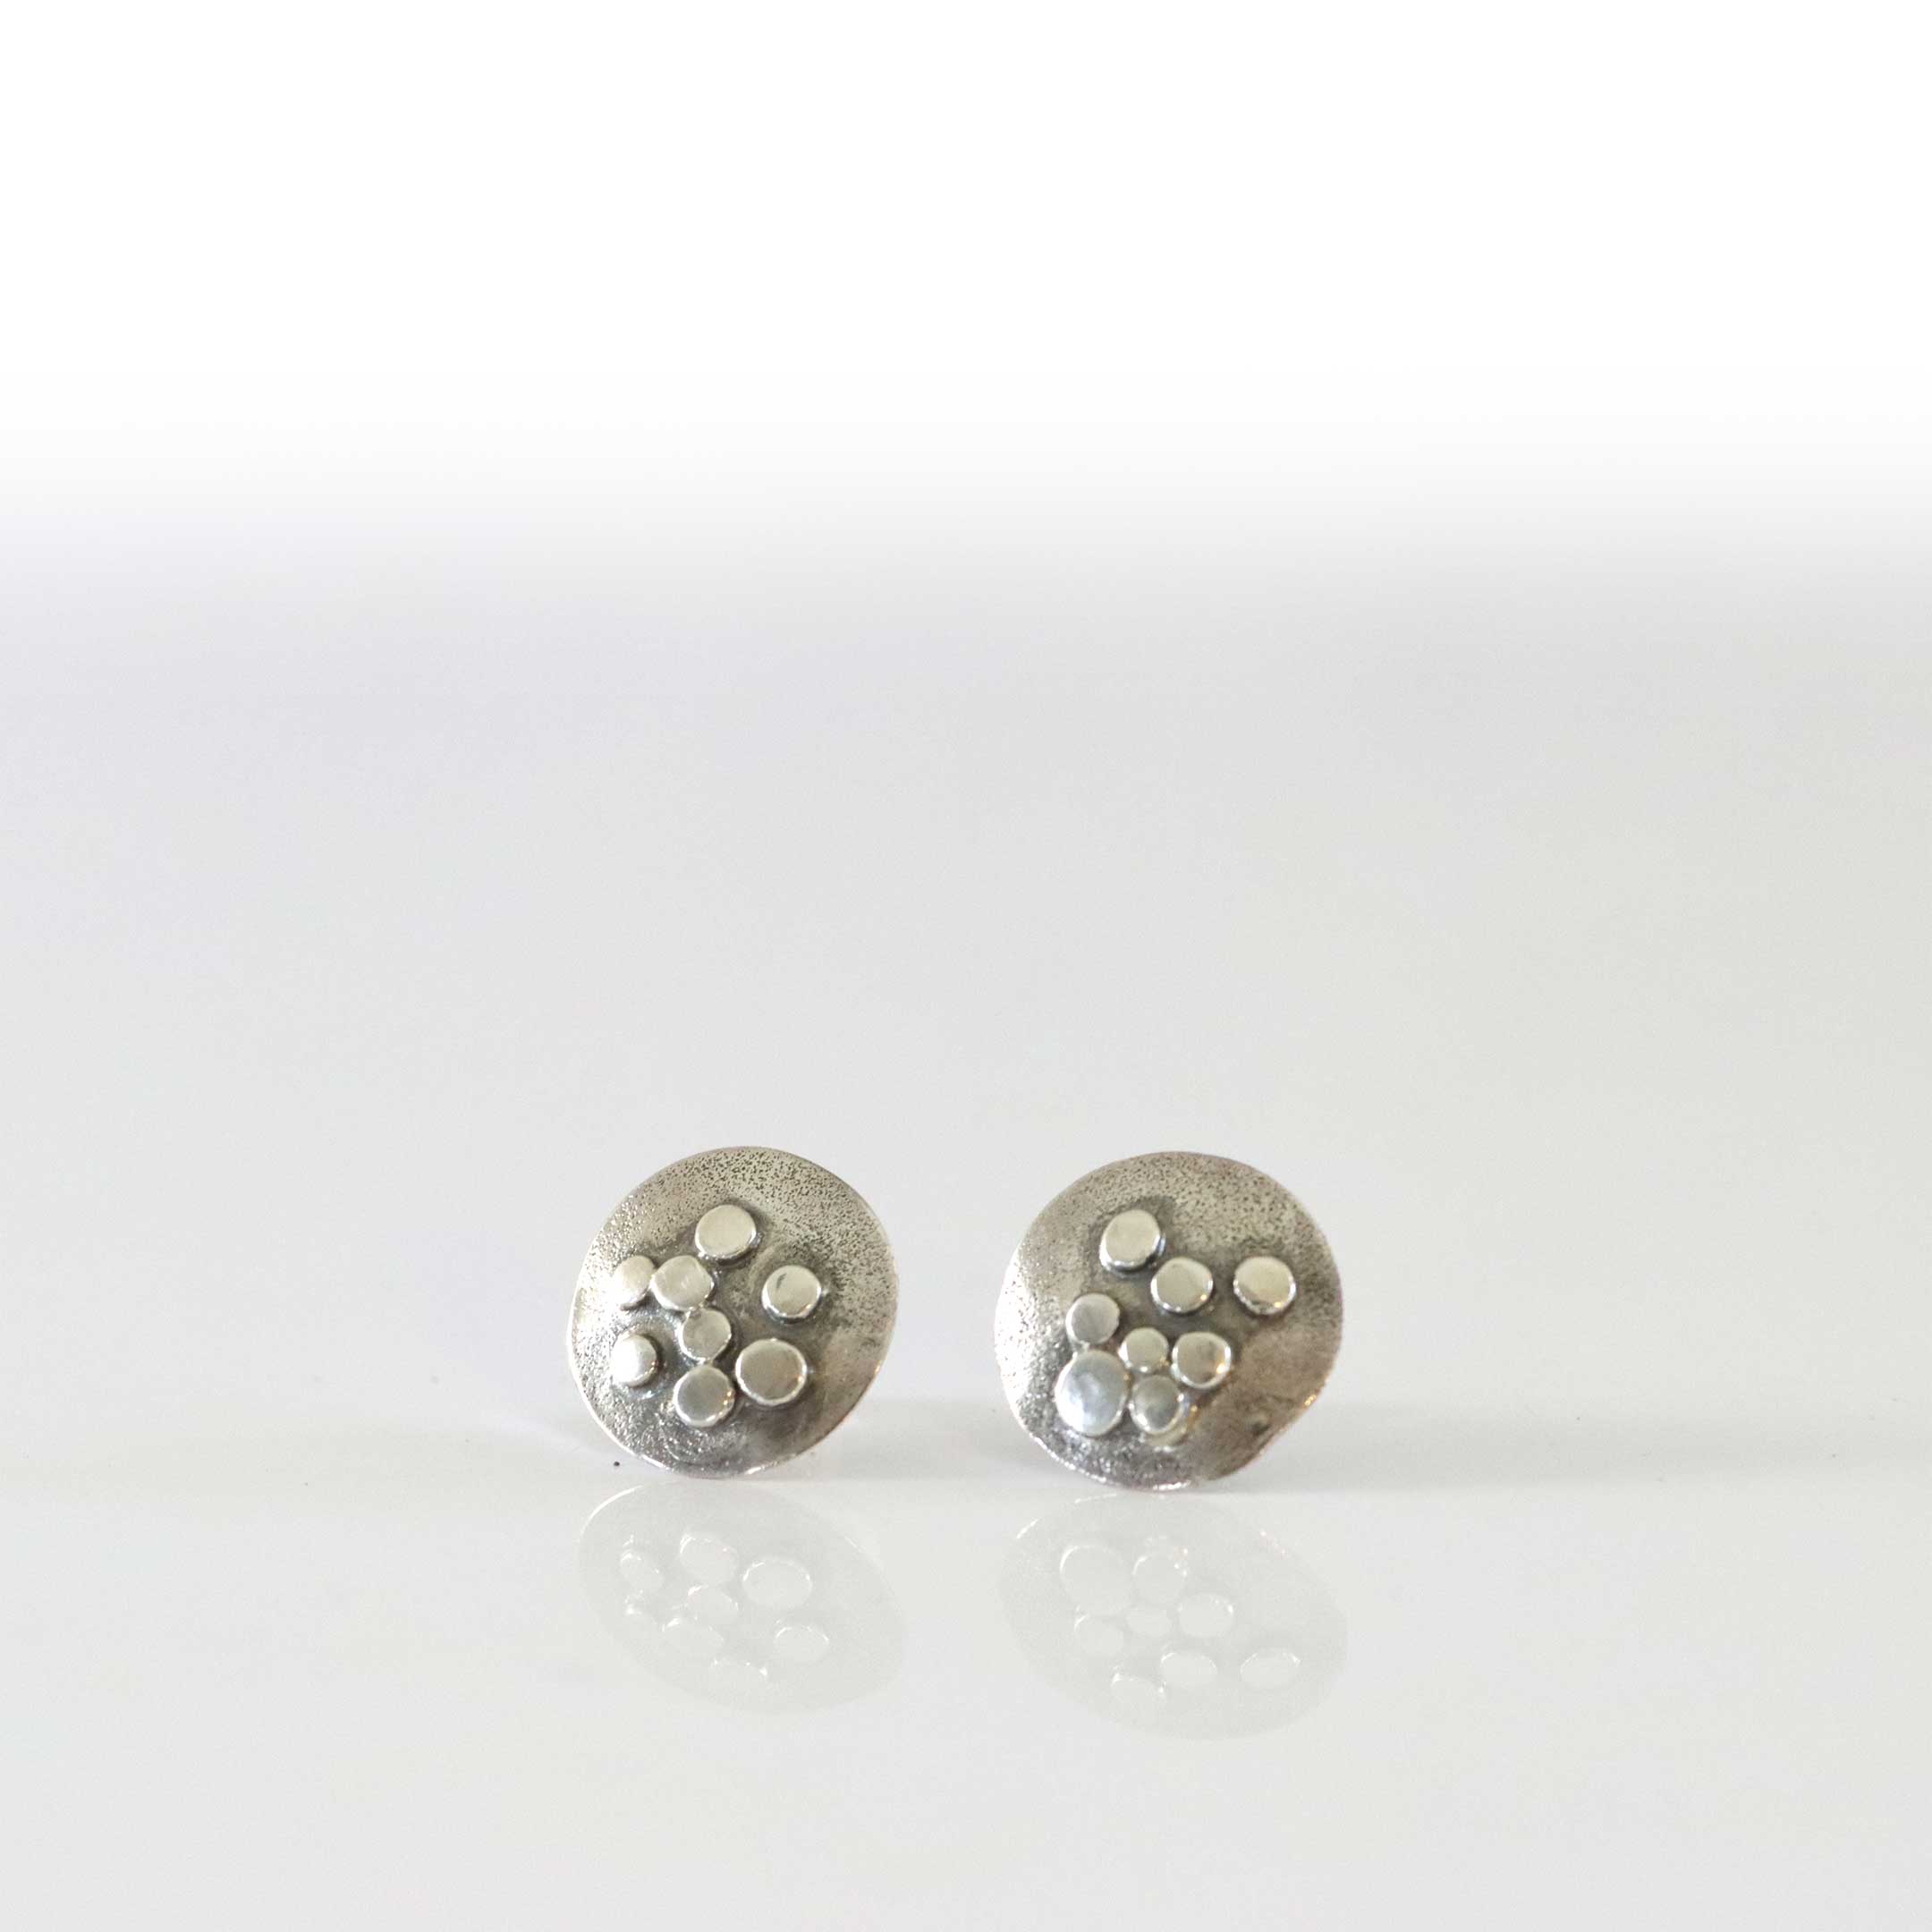 Silver Silver Stud Earrings, Textured with Sterling Silver Dots